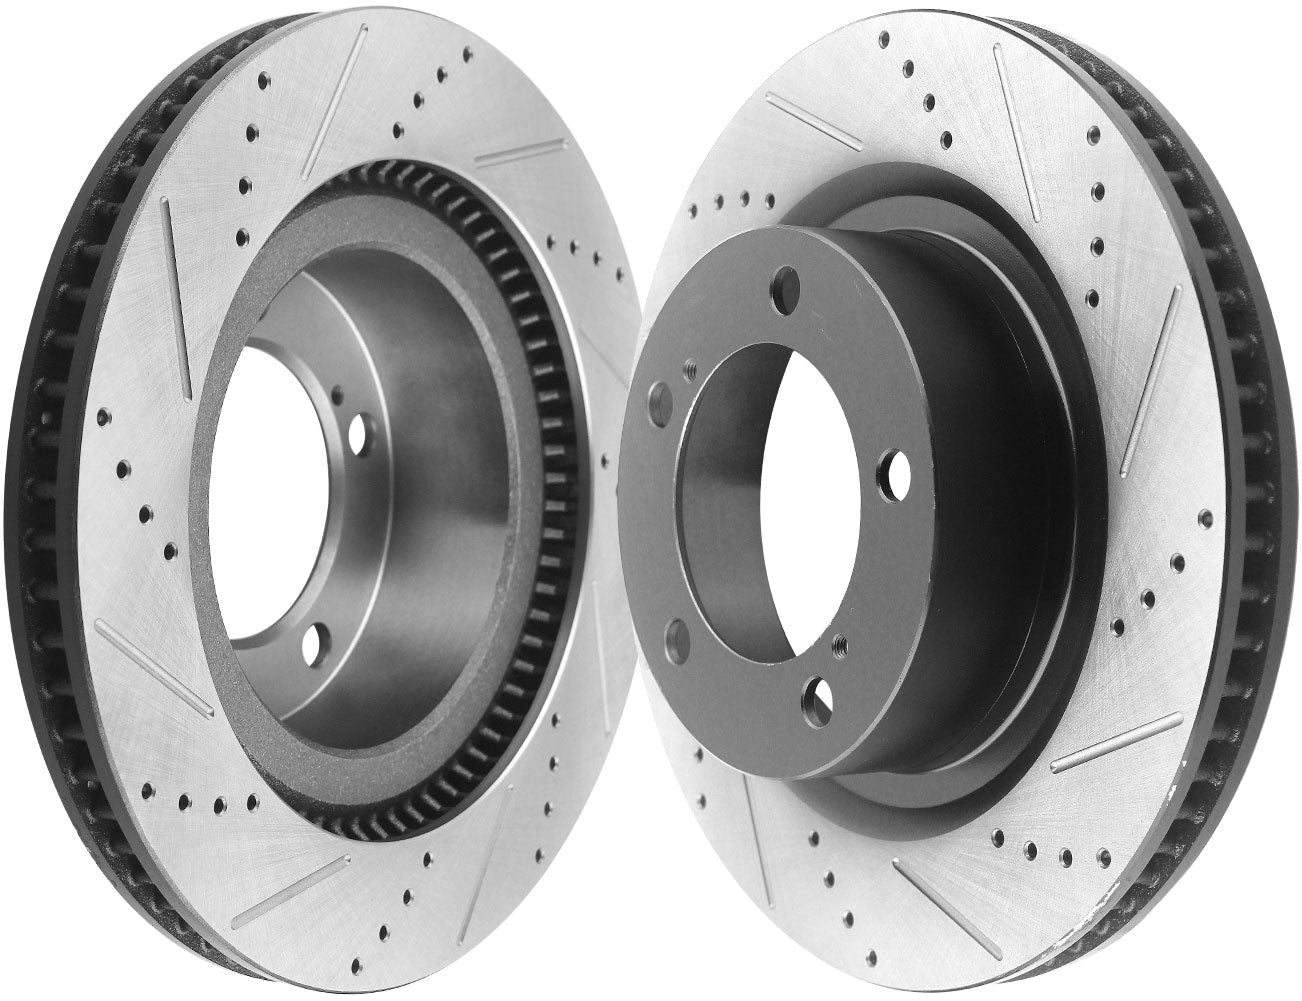 JADODE Front Brake Rotors and Pads for Toyota Sequoia Tundra Lexus Lx570 2007-20